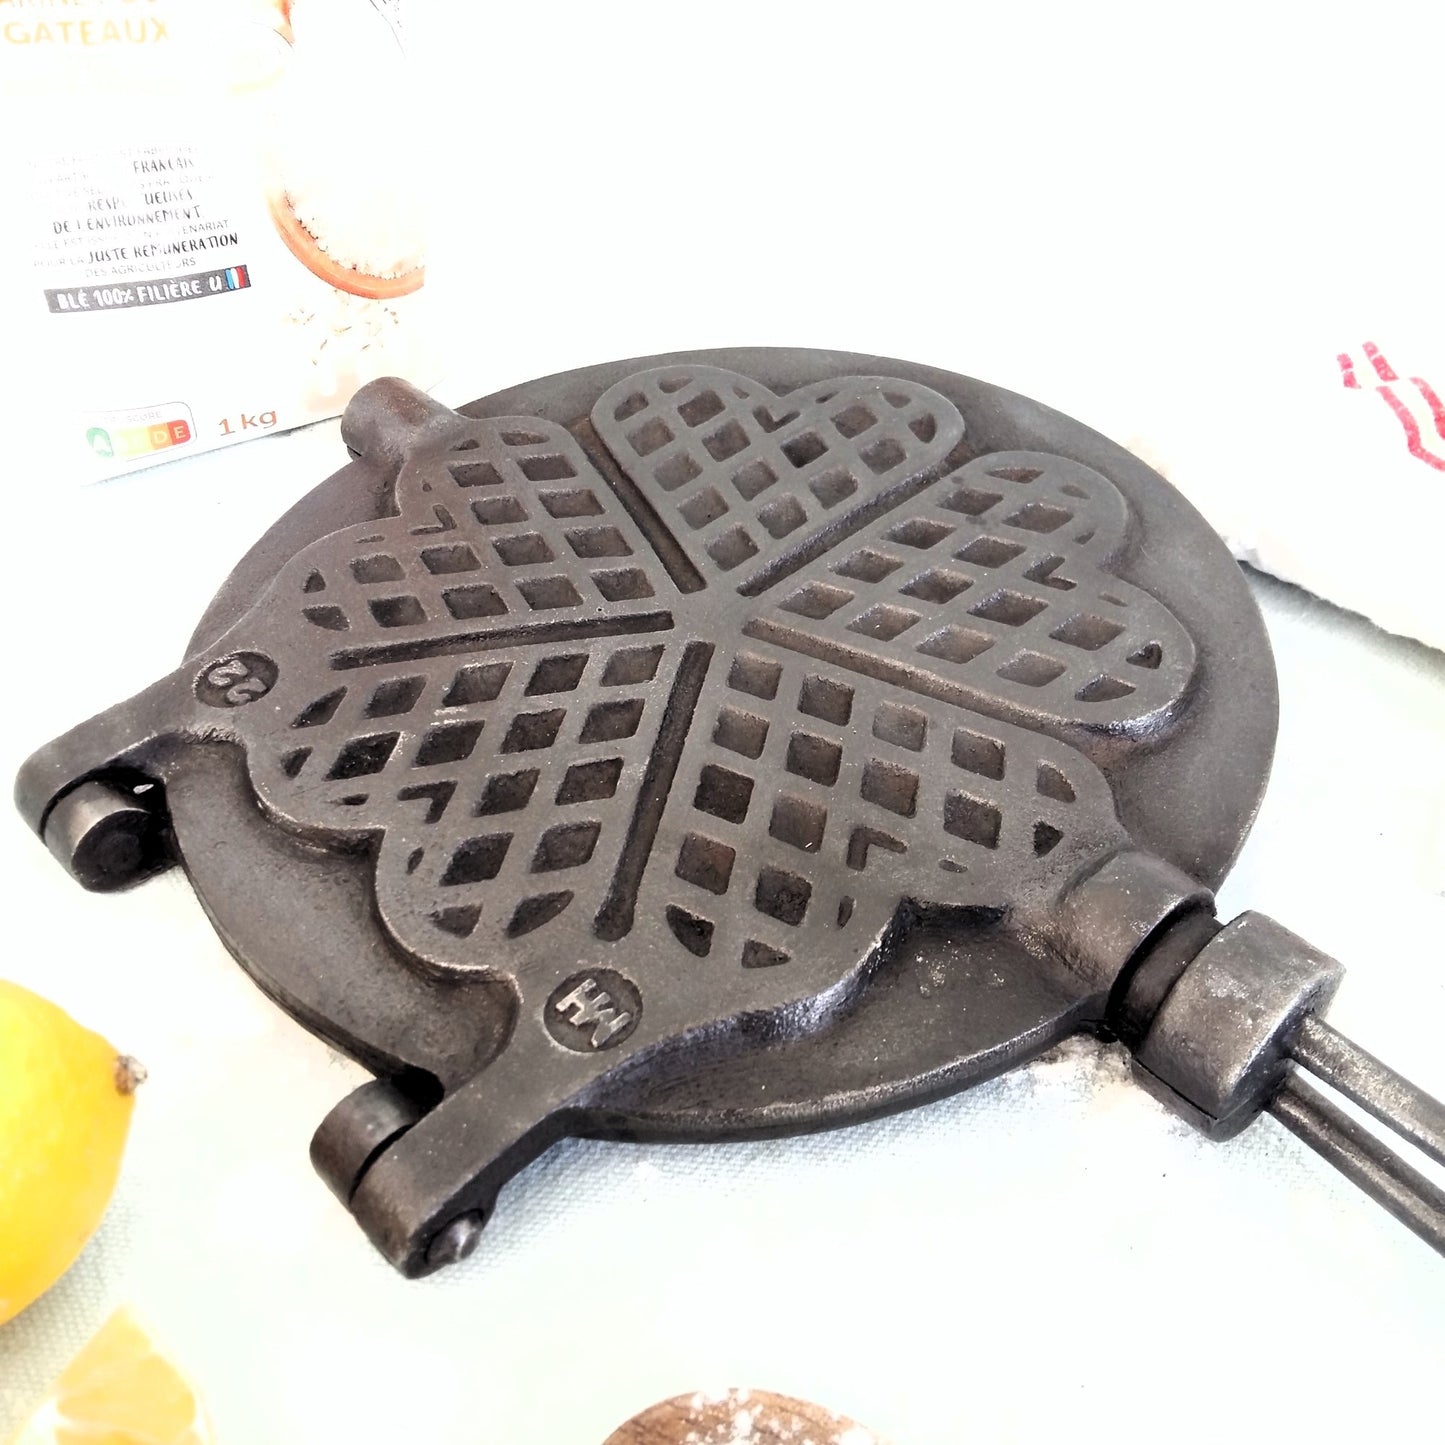  Antique Cast Iron Waffle Maker from Tiggy & Pip. €159.00 with FREE worldwide shipping.